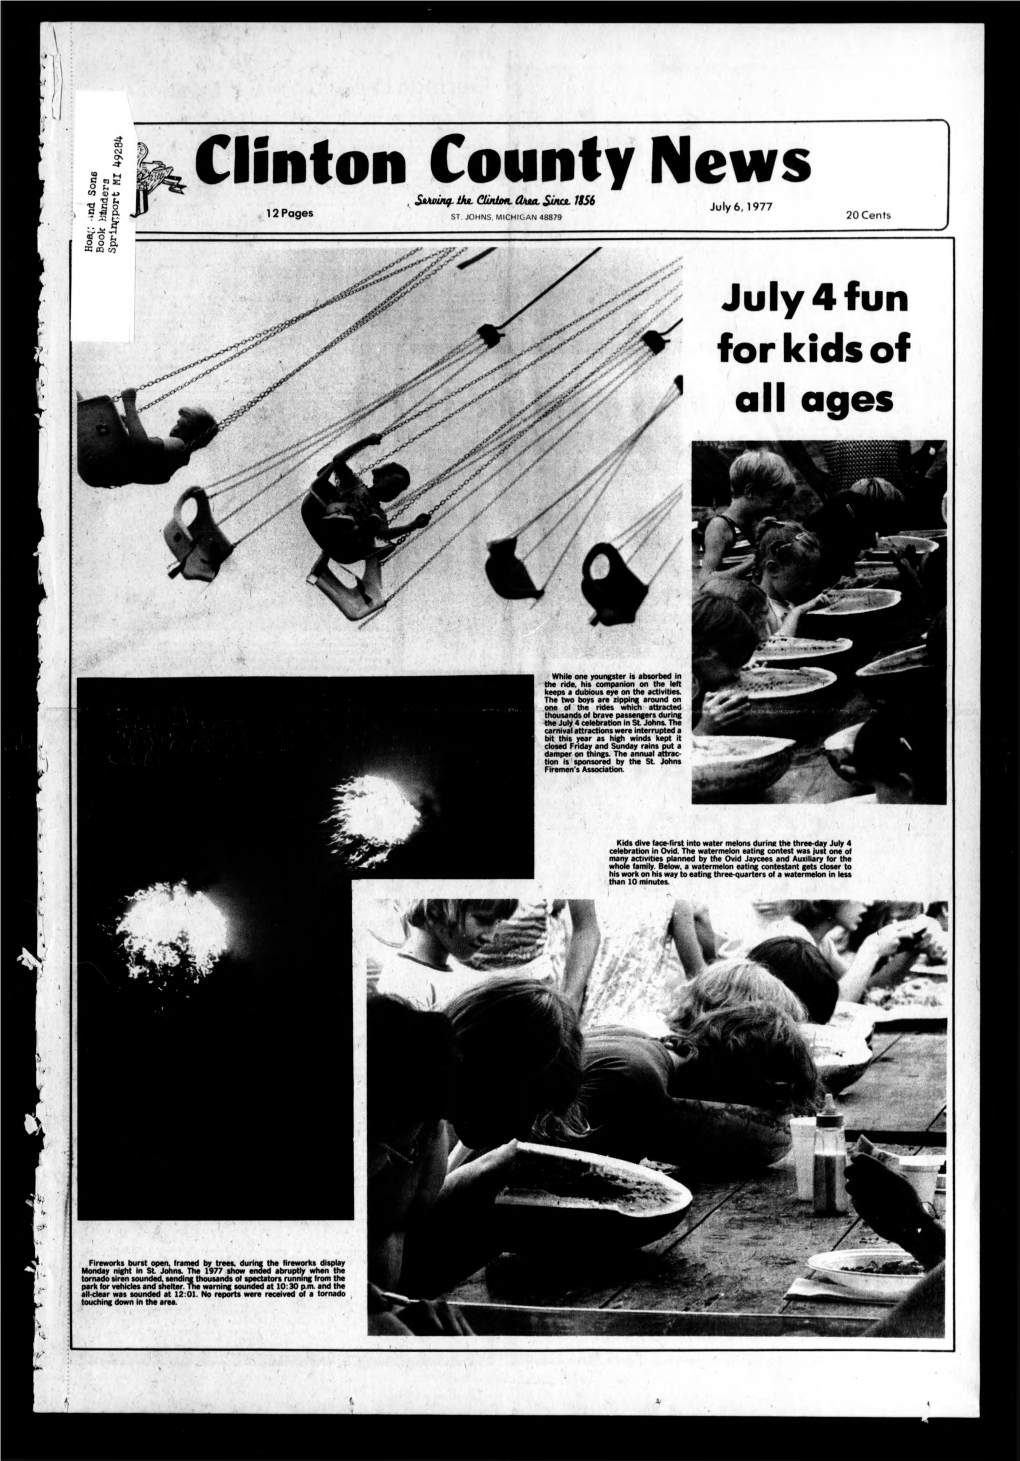 Clinton County News CO (1> -U •D $4 S^^Uuf- Lha, Cliniotl Cbuul Siftol J8S6 July 6,1977 12 Pages ST